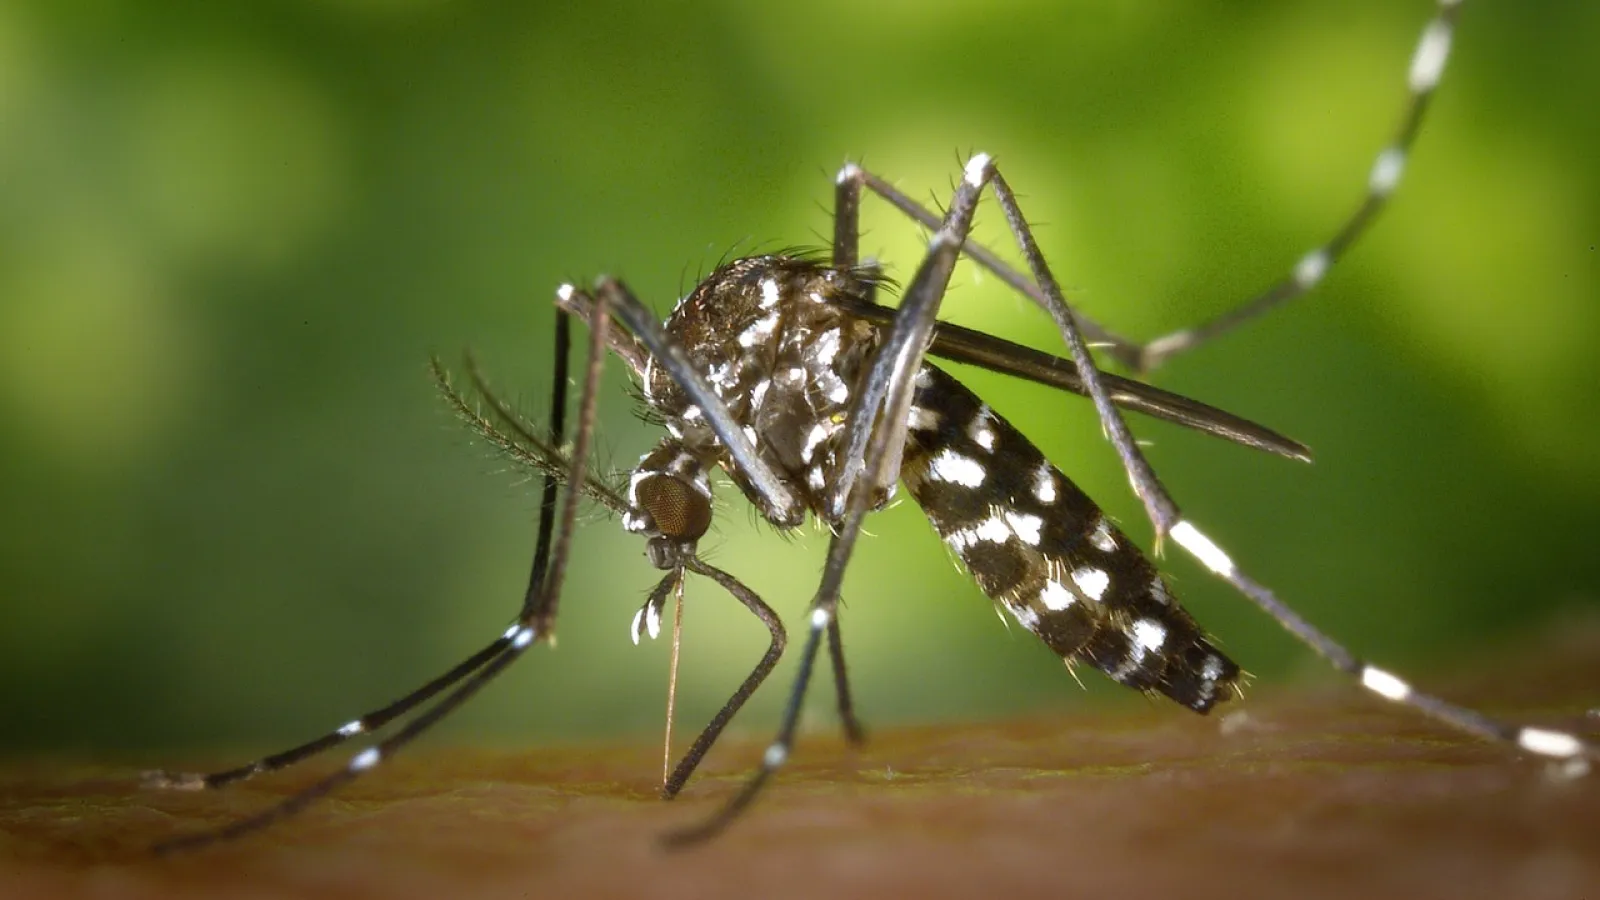 a close up of a black and white mosquito biting a person